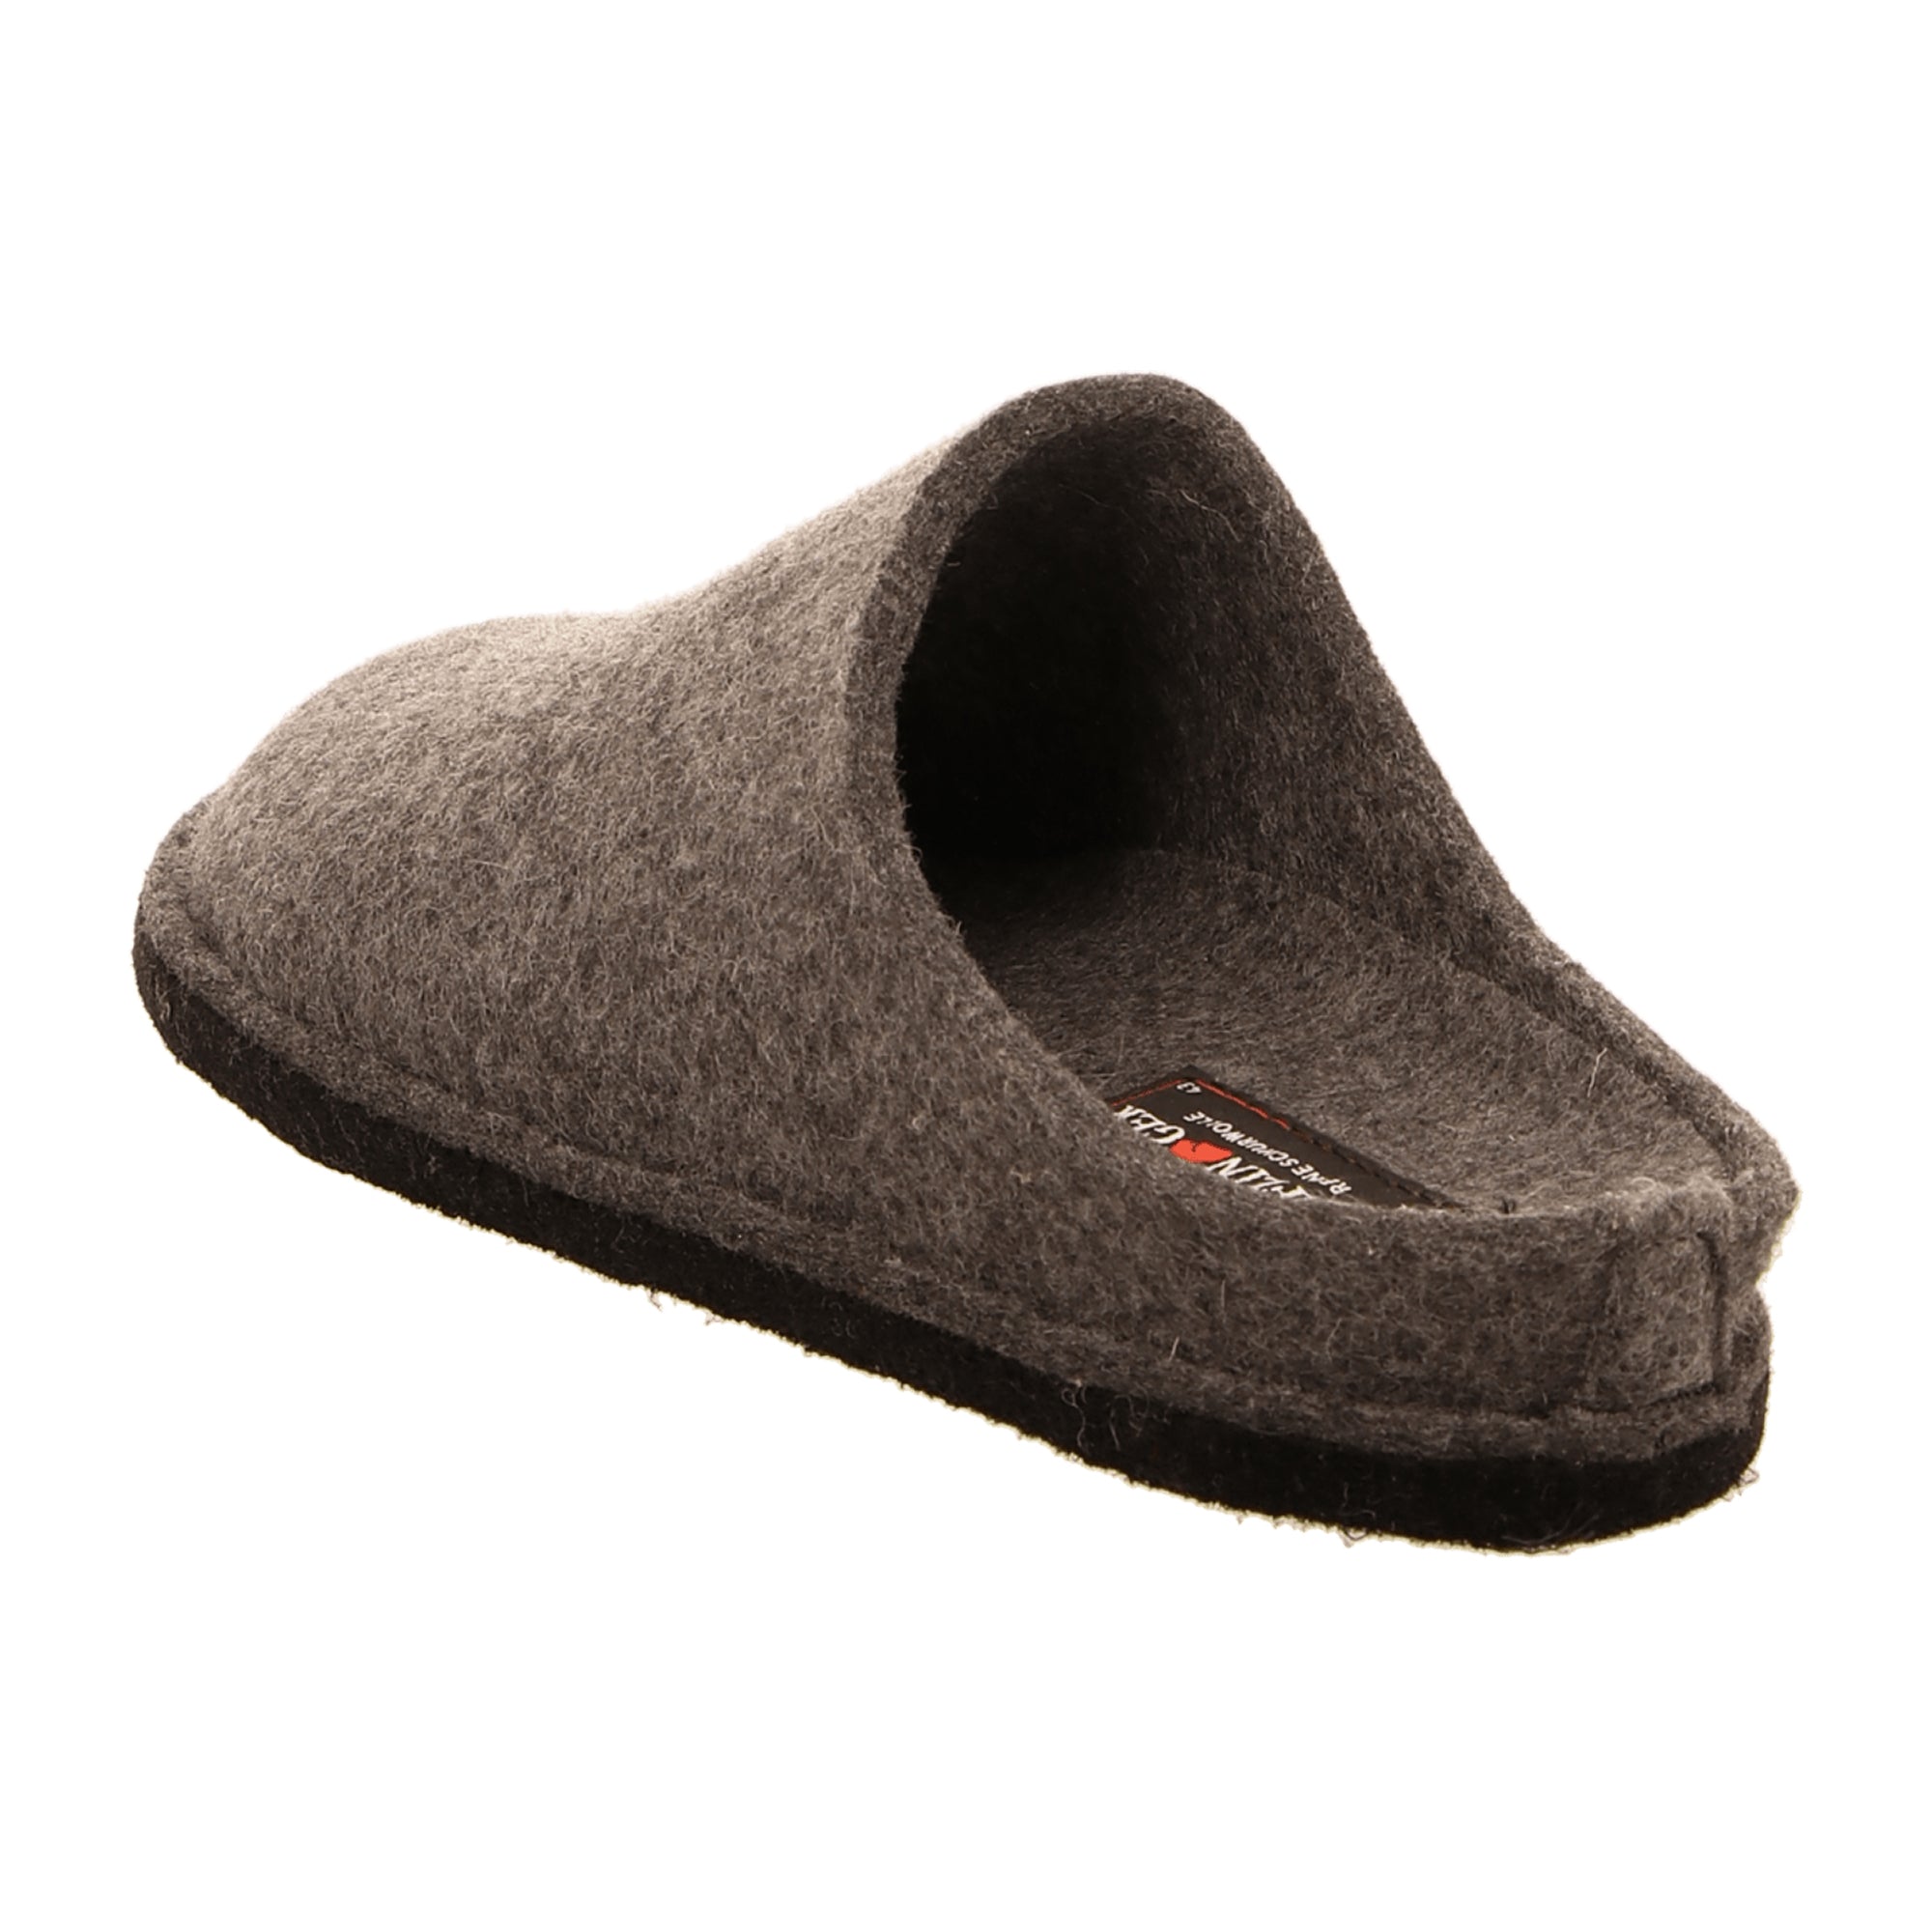 Haflinger Flair Soft Men's Slippers - Anthracite Gray | Stylish & Comfortable